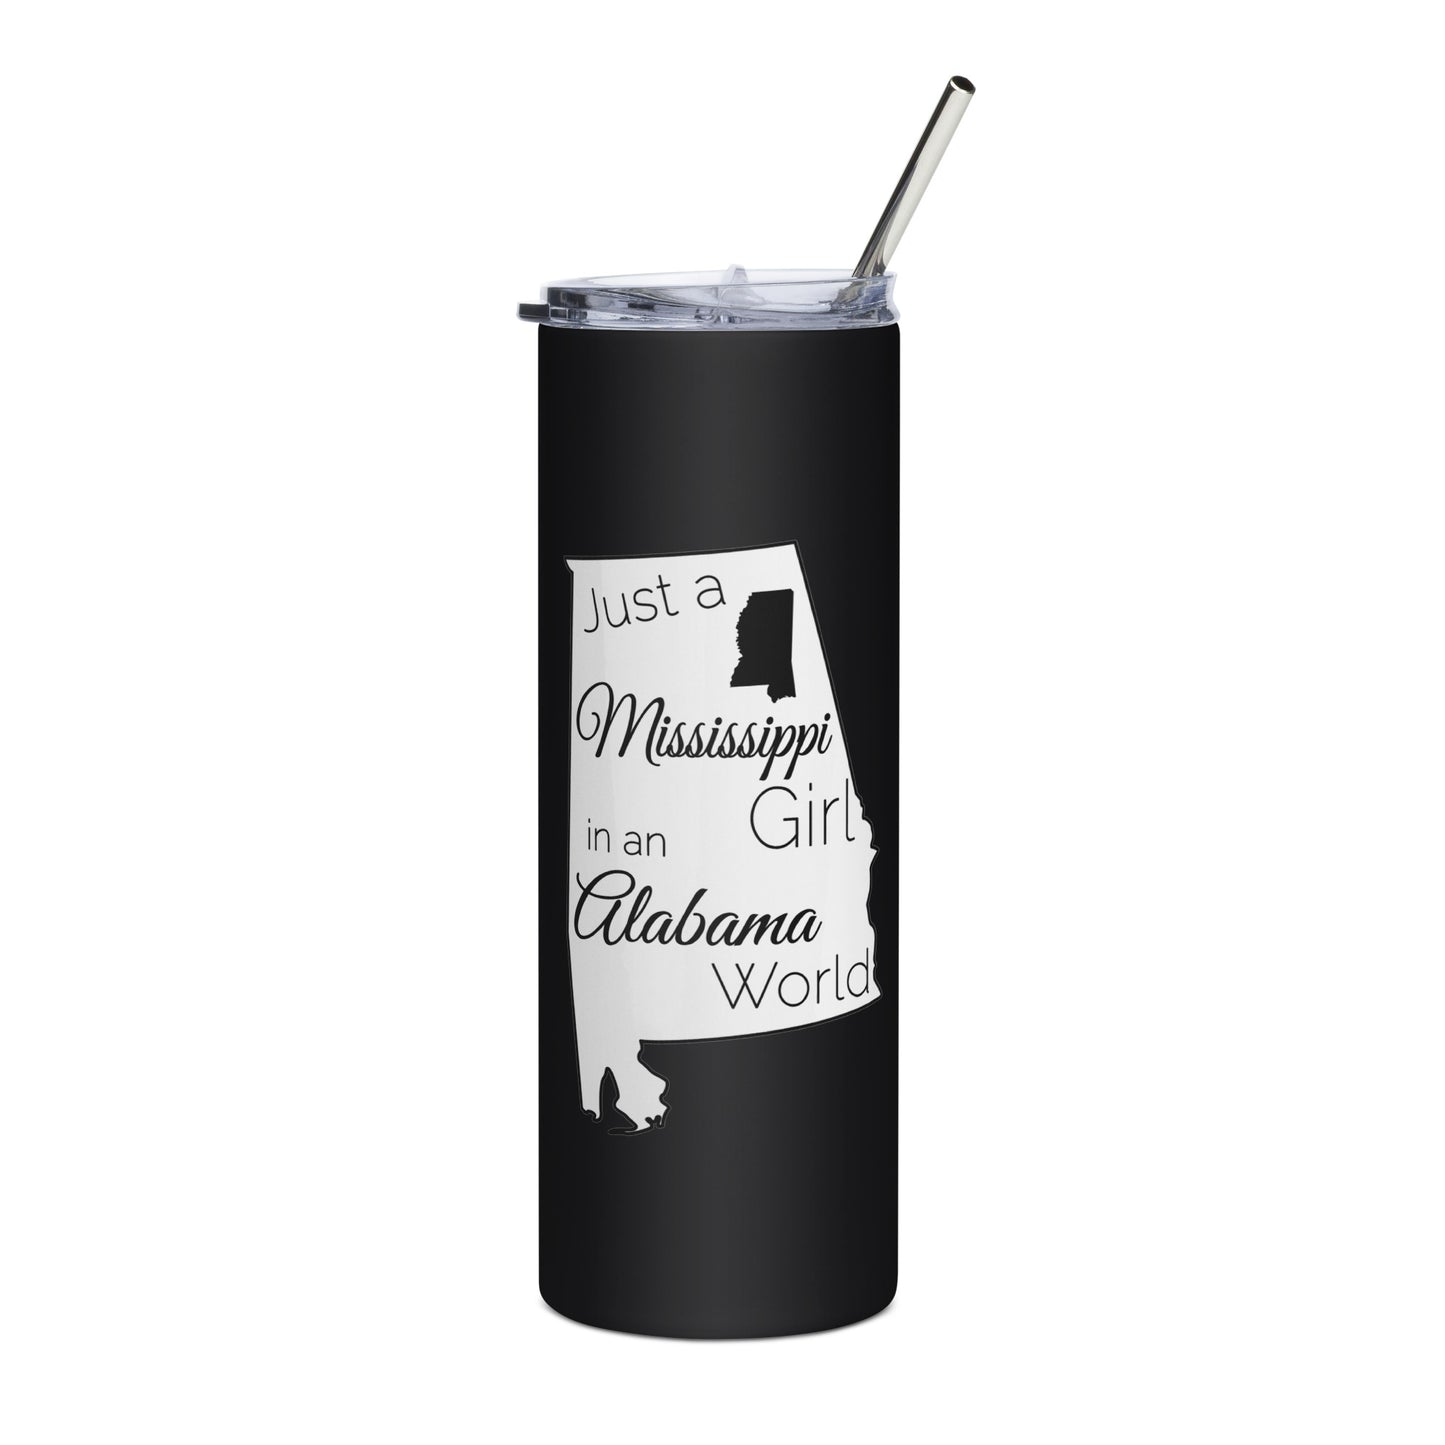 Just a Mississippi Girl in an Alabama World Stainless steel tumbler